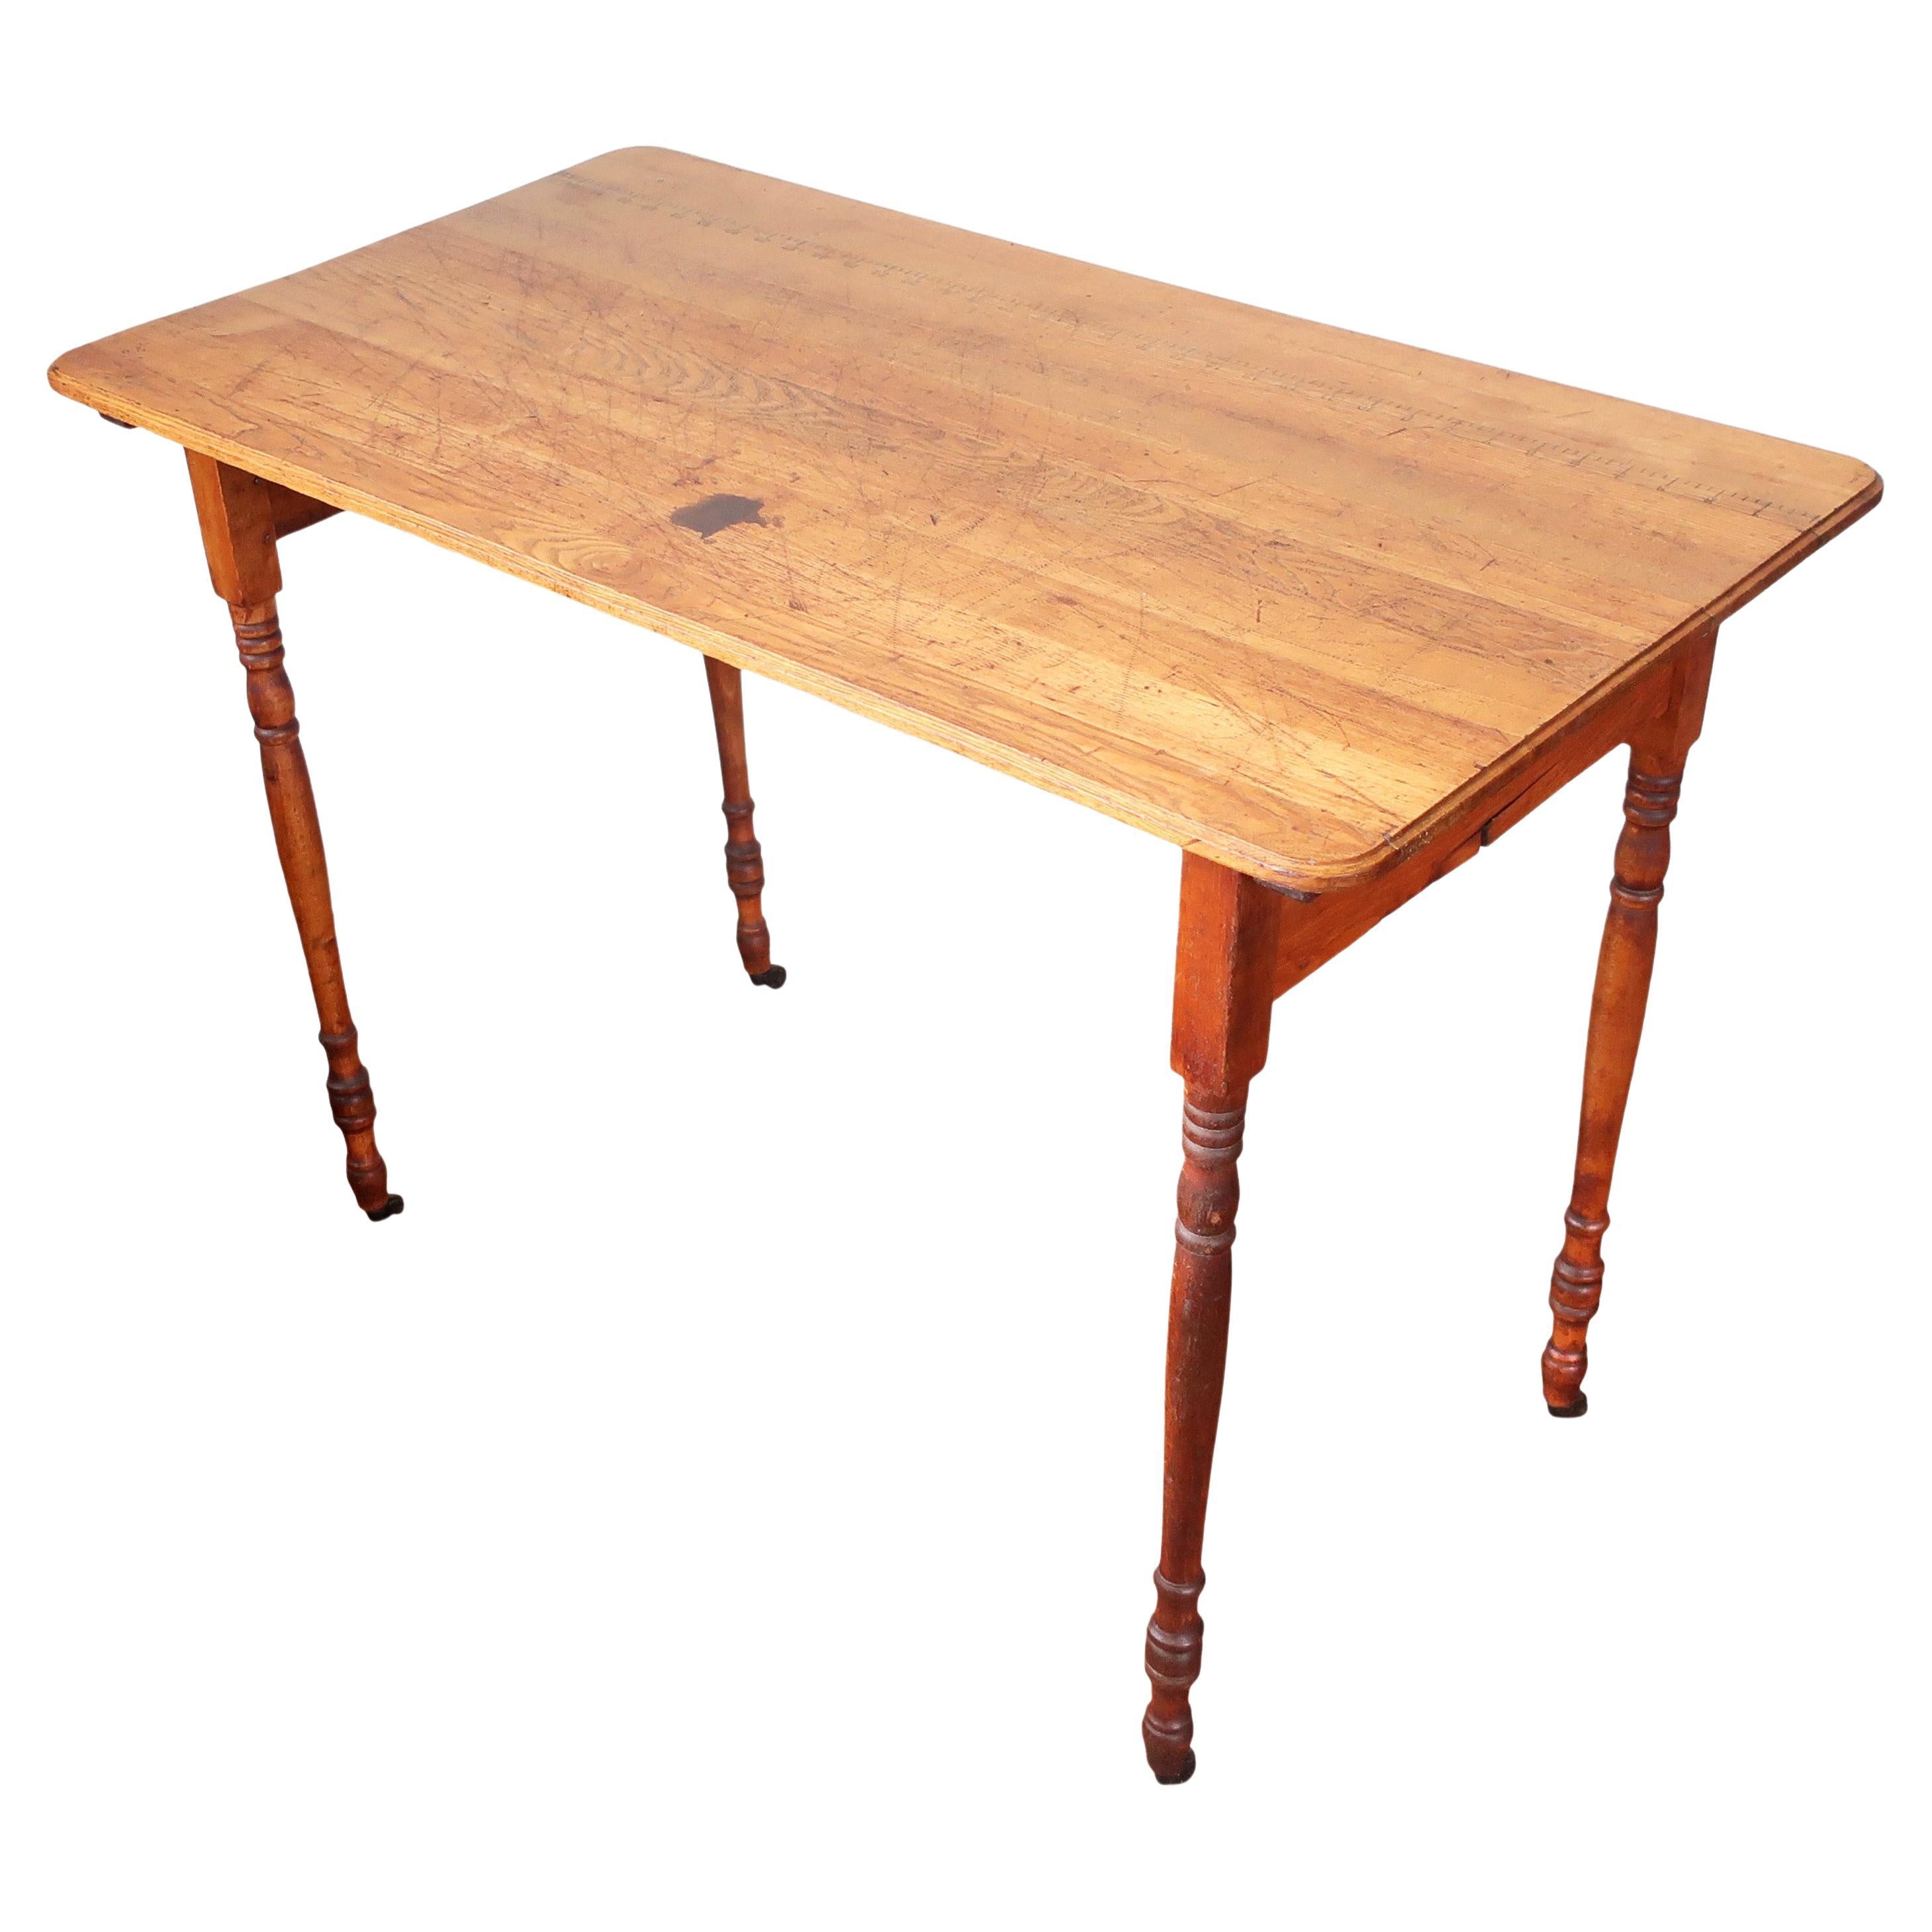 19th Century Folding Sewing Table with Yardstick Top